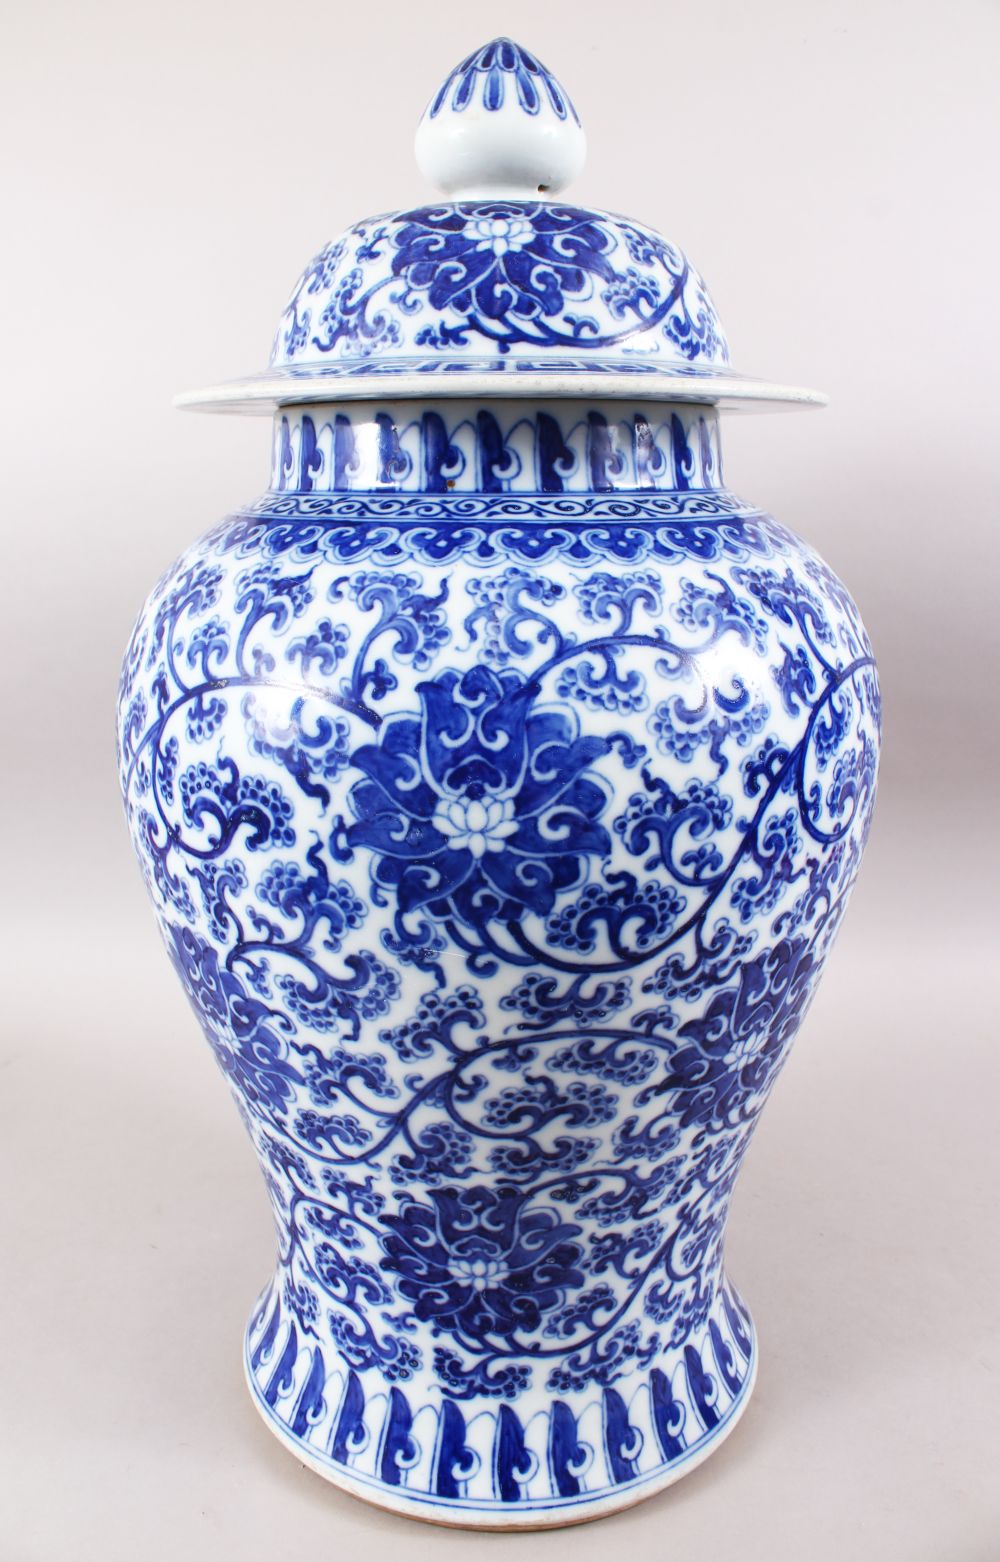 A LARGE CHINESE BLUE & WHITE PORCELAIN LIDDED JAR, the body decorated with scenes of formal